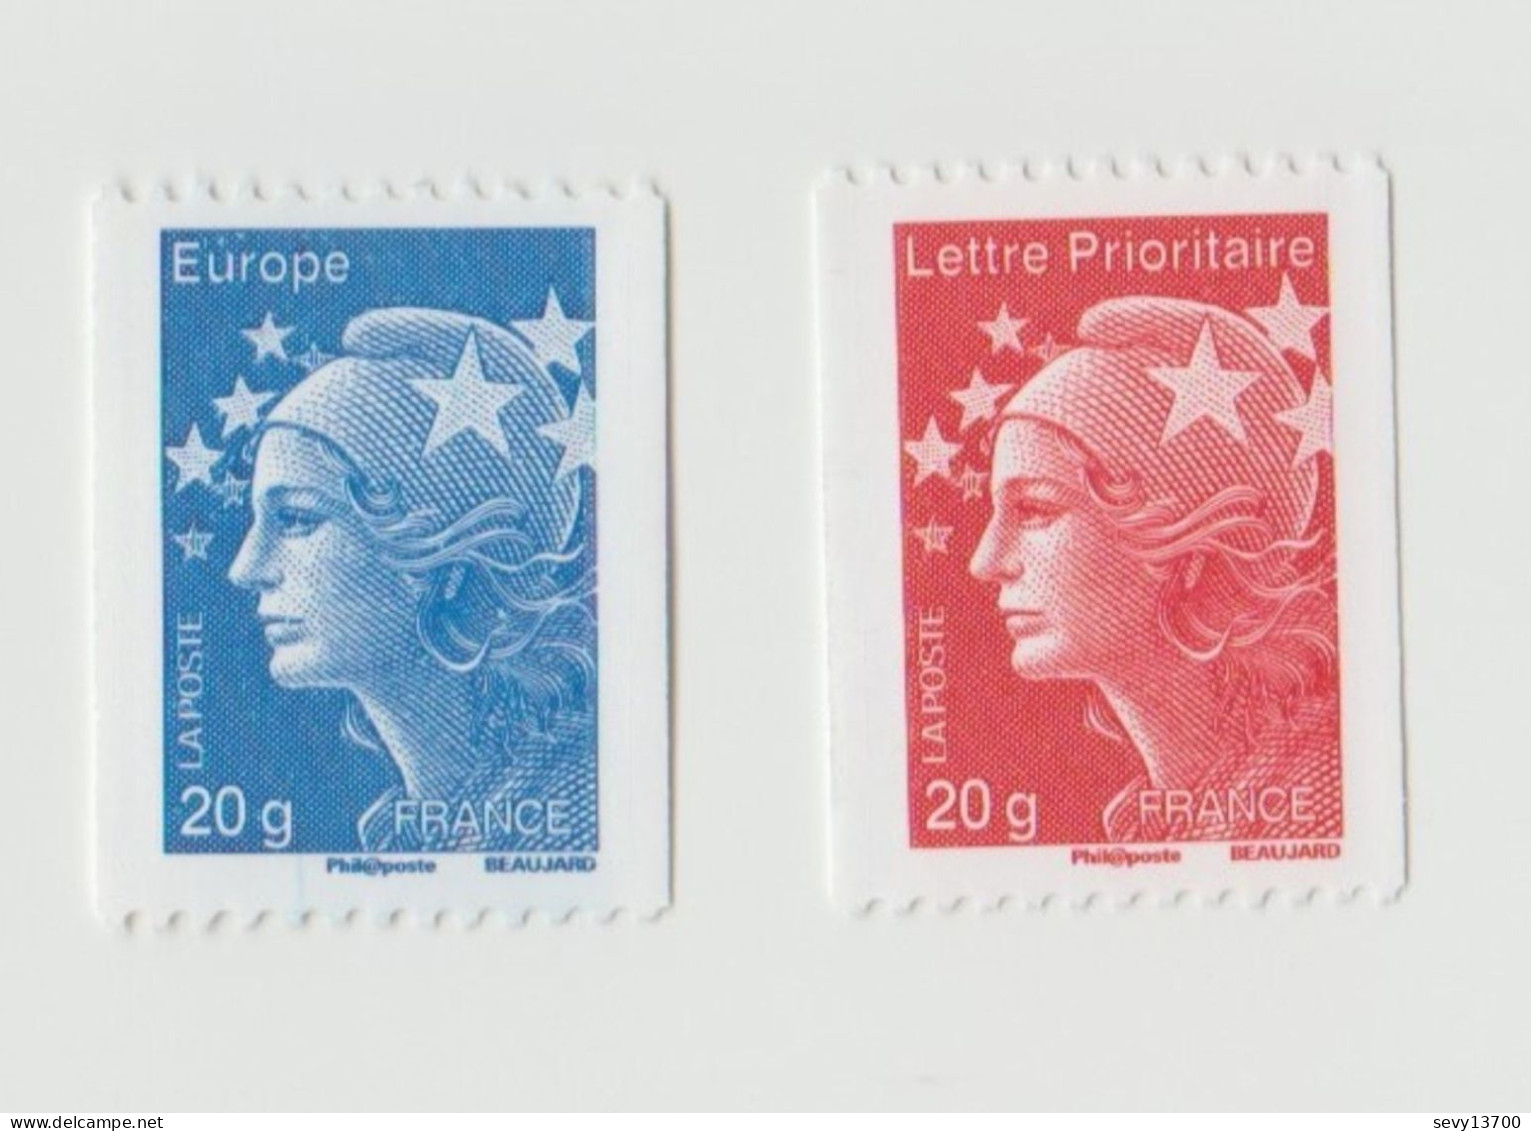 France Année 2009 - 2 Timbres Roulette Marianne De Beaujard Neuf Yvert Tellier 4573 Et 4572 - 2008-2013 Marianne Of Beaujard